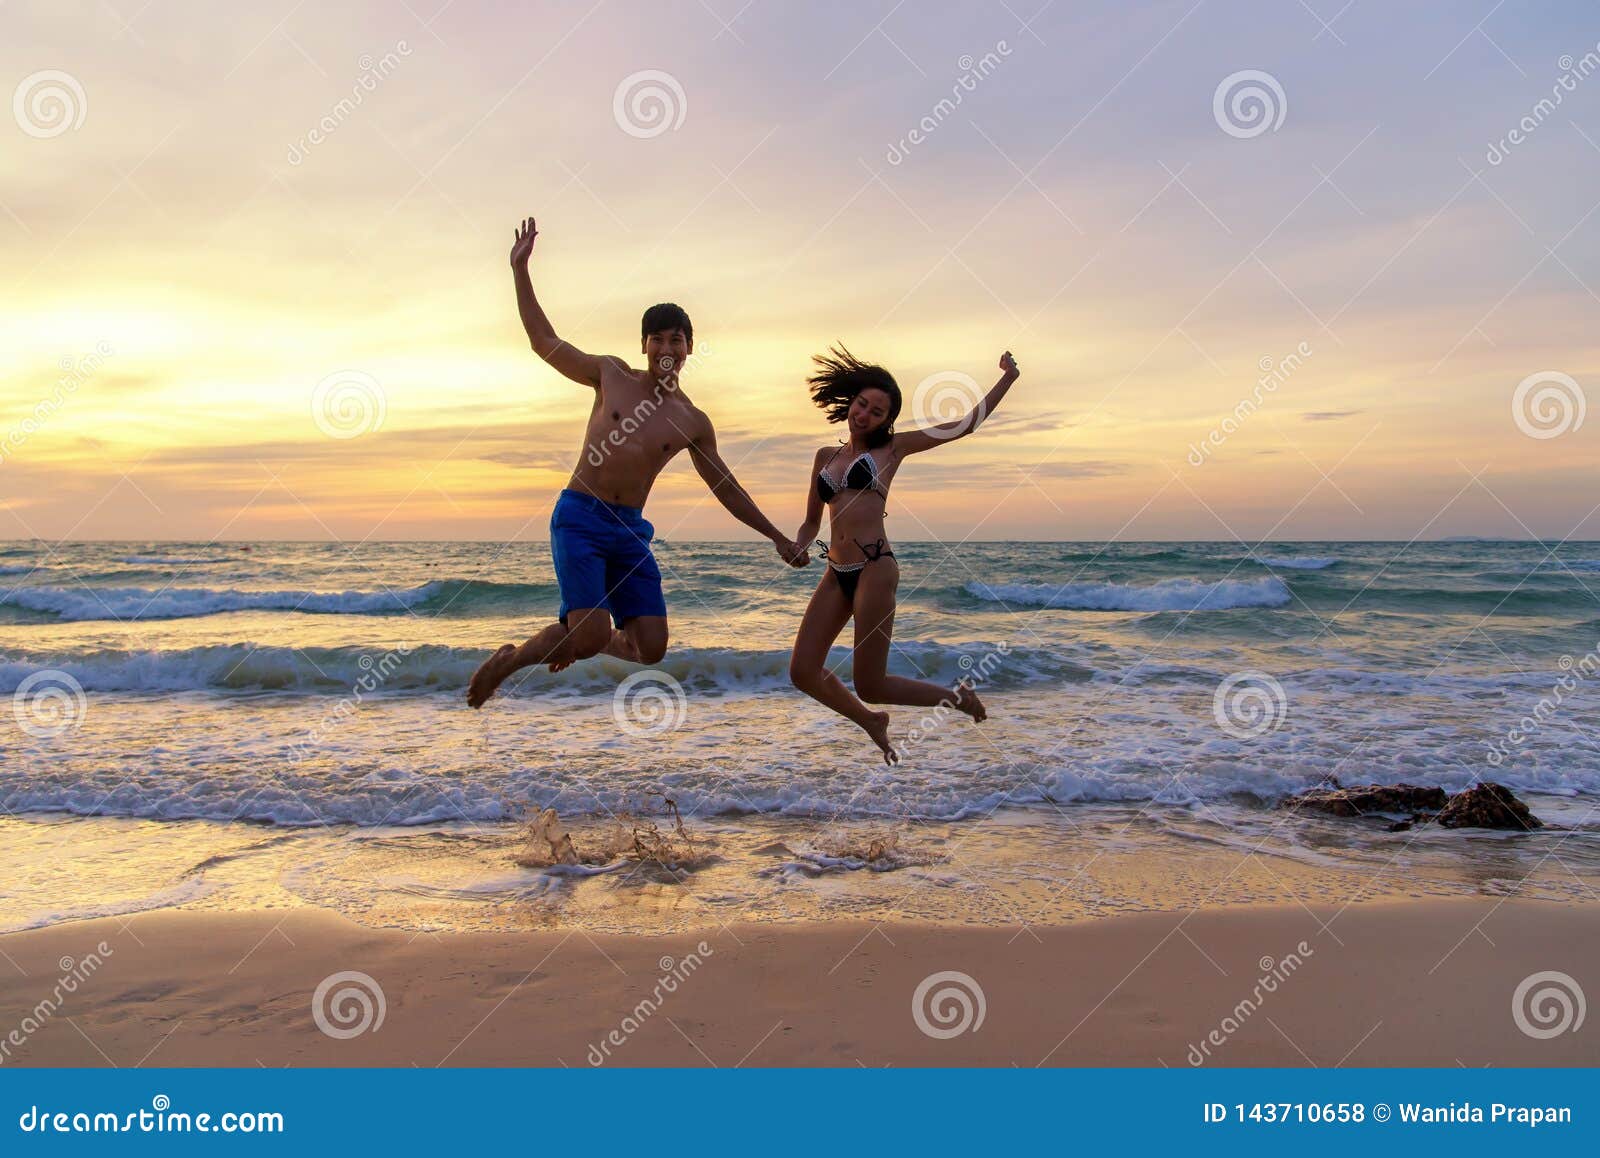 summer vacation.  couple jumping holding hands on tropical on the beach sunset time in holiday trips.  honeymoon holidays people r